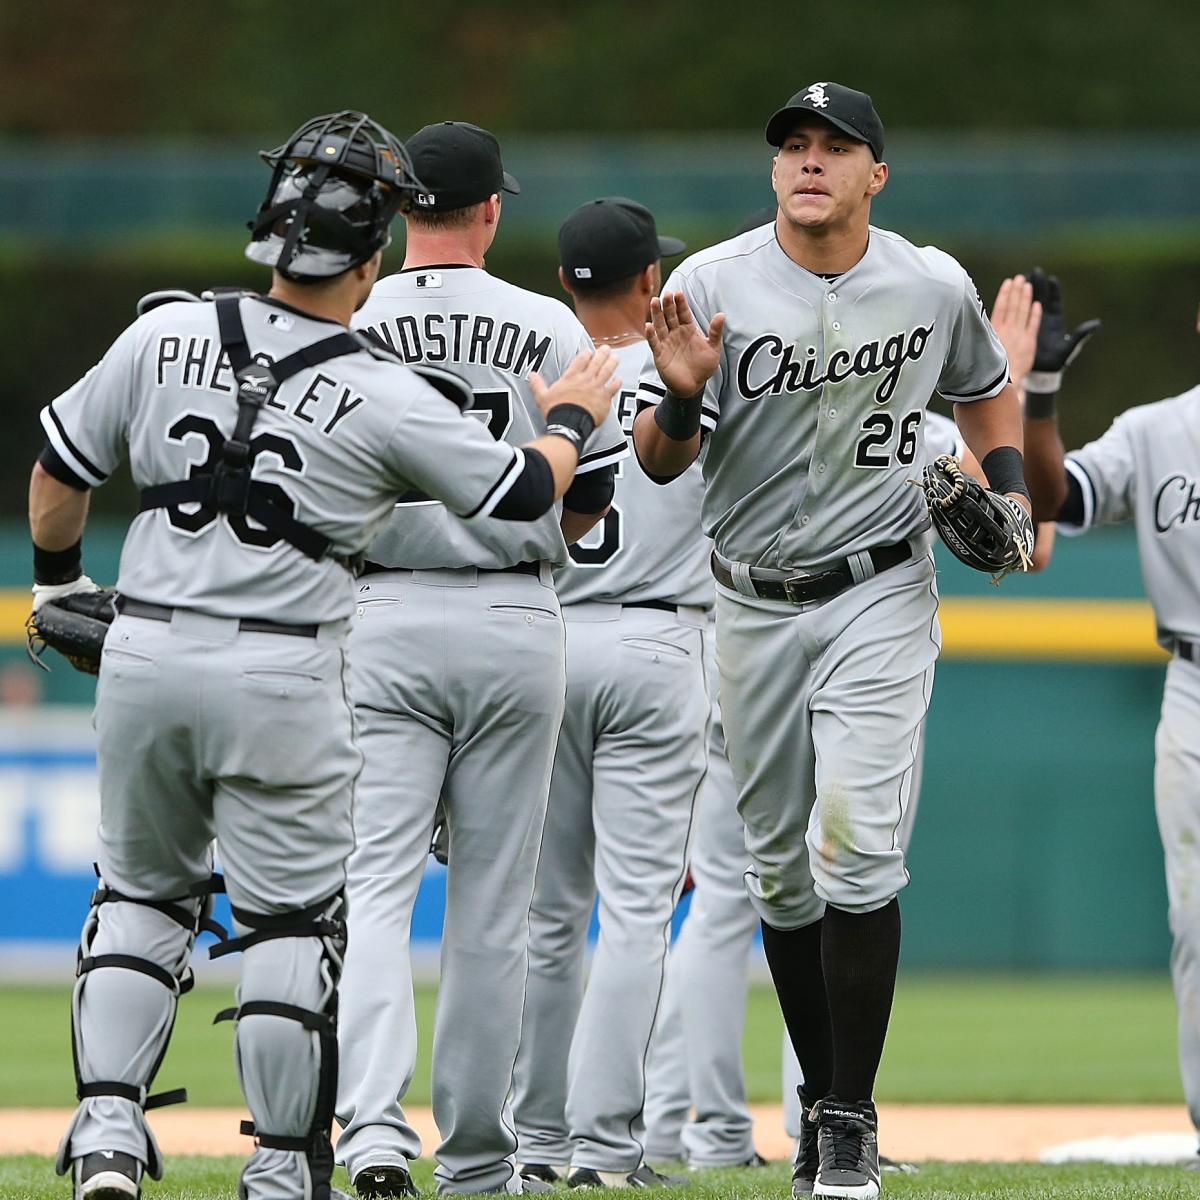 Following up: Despite swaps, White Sox roster even more uncertain